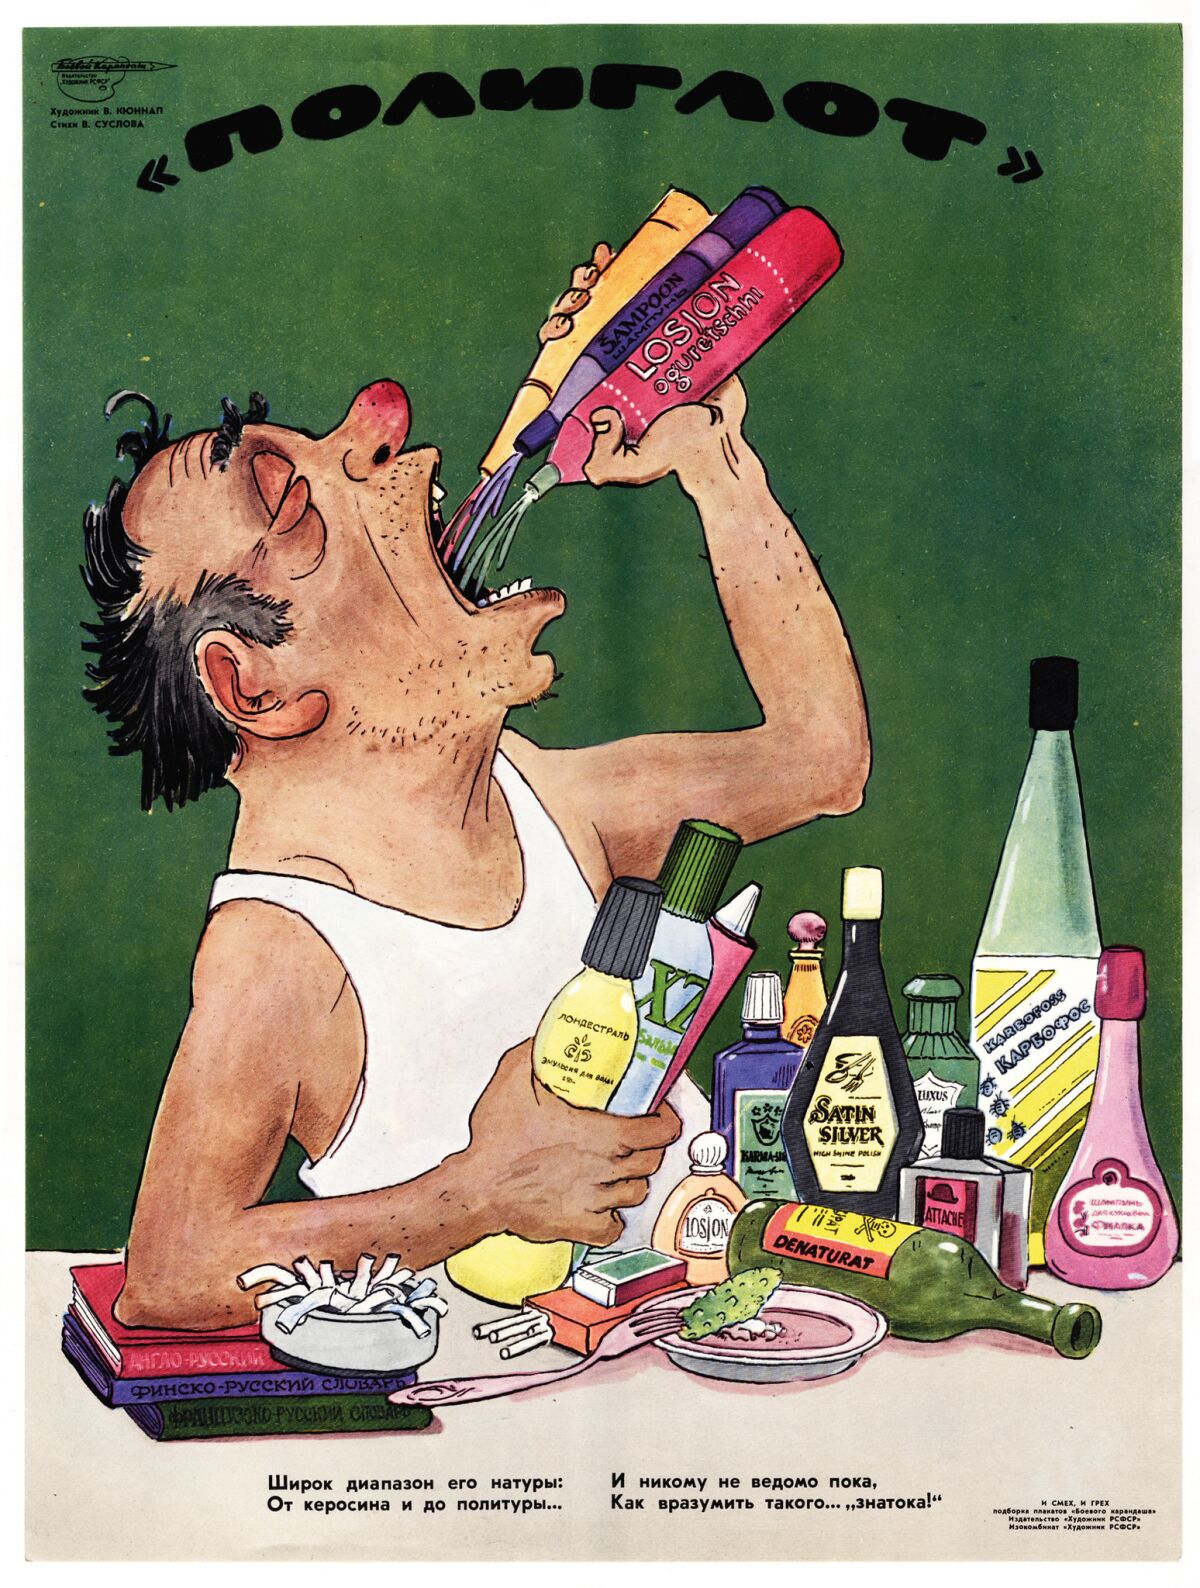 A 1985 image from "Alcohol: Soviet Anti-Alcohol Posters." The text at the bottom reads, "His palette is rather broad, from kerosene to varnishes. And no one has been able to figure out so far how to talk sense into such a ... 'connoisseur'!" (V . Kyunnap / Fuel Publishing)